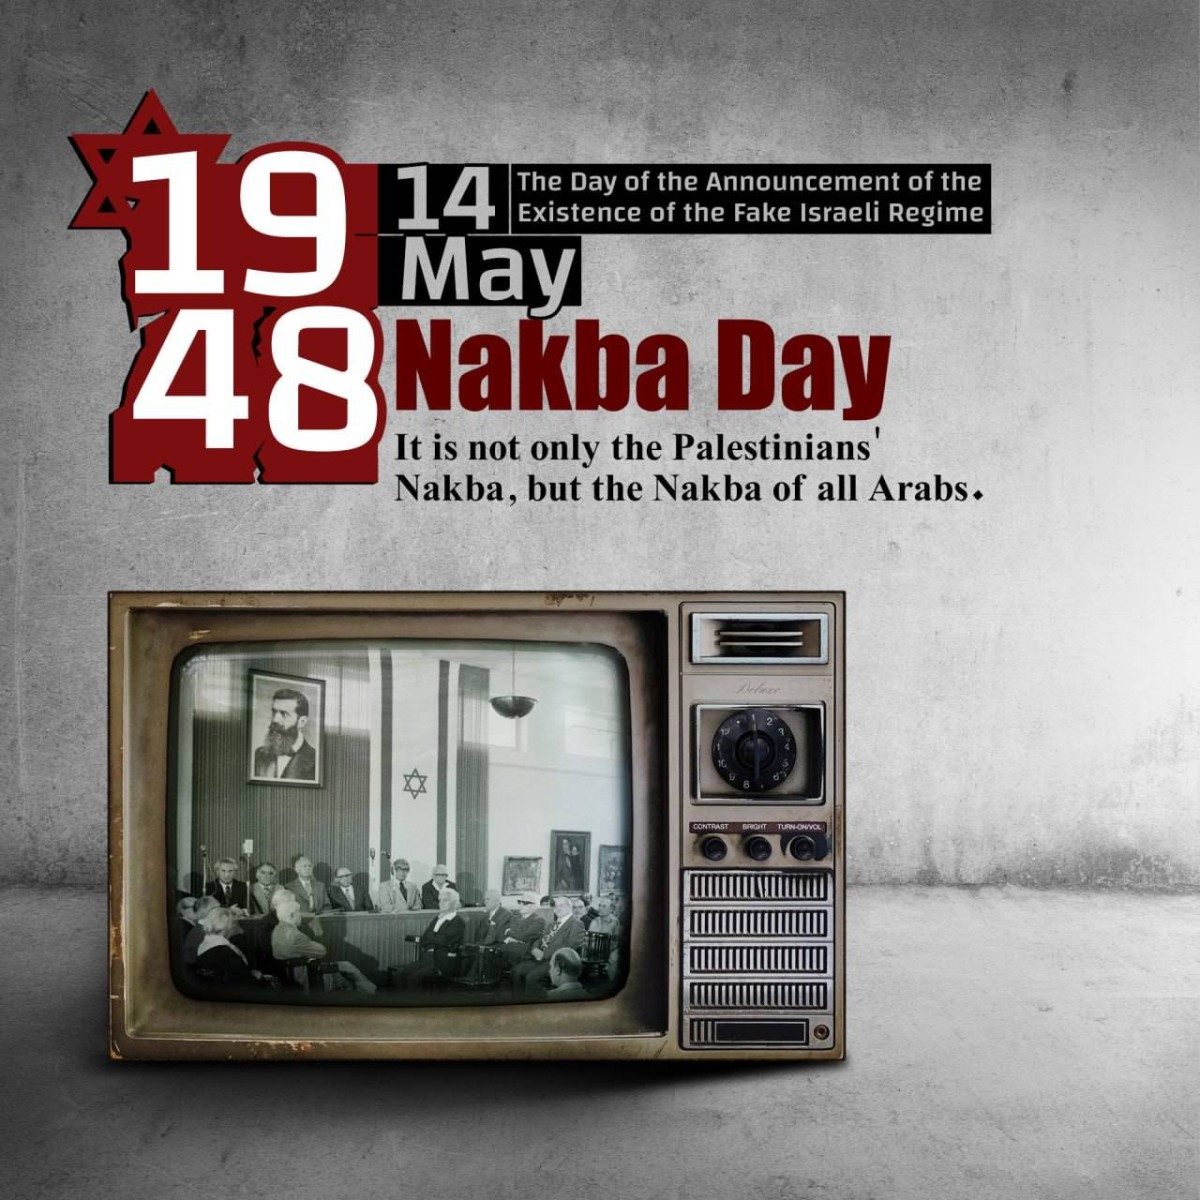 1Poster Collection "Nakbat Day"